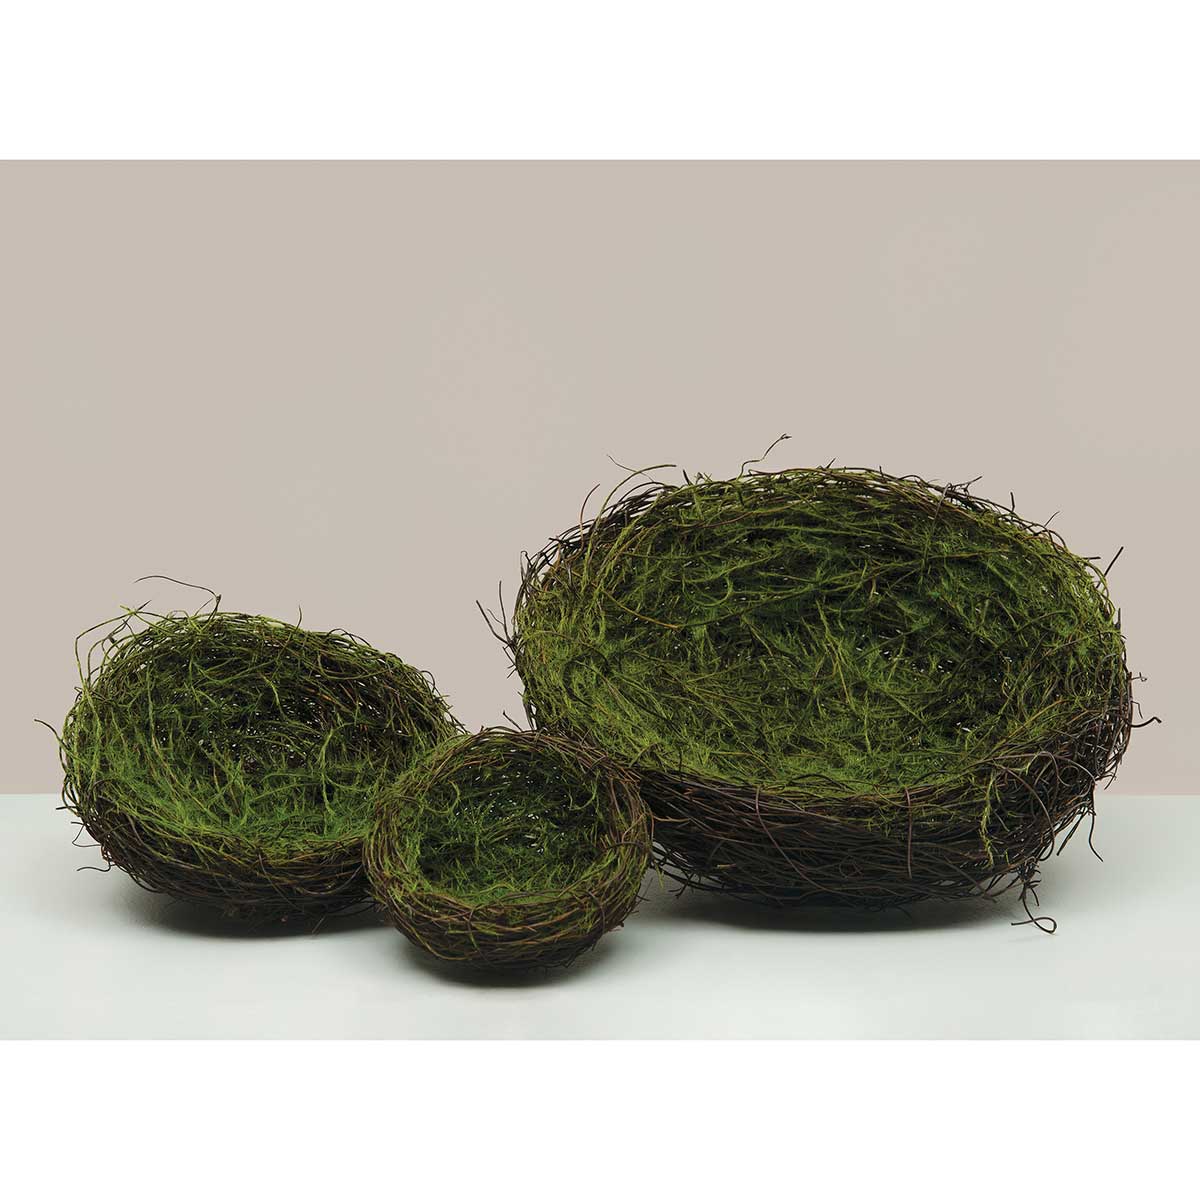 TWIG NEST MOSSY LARGE 10IN X 3.5IN TWIG/WOOD